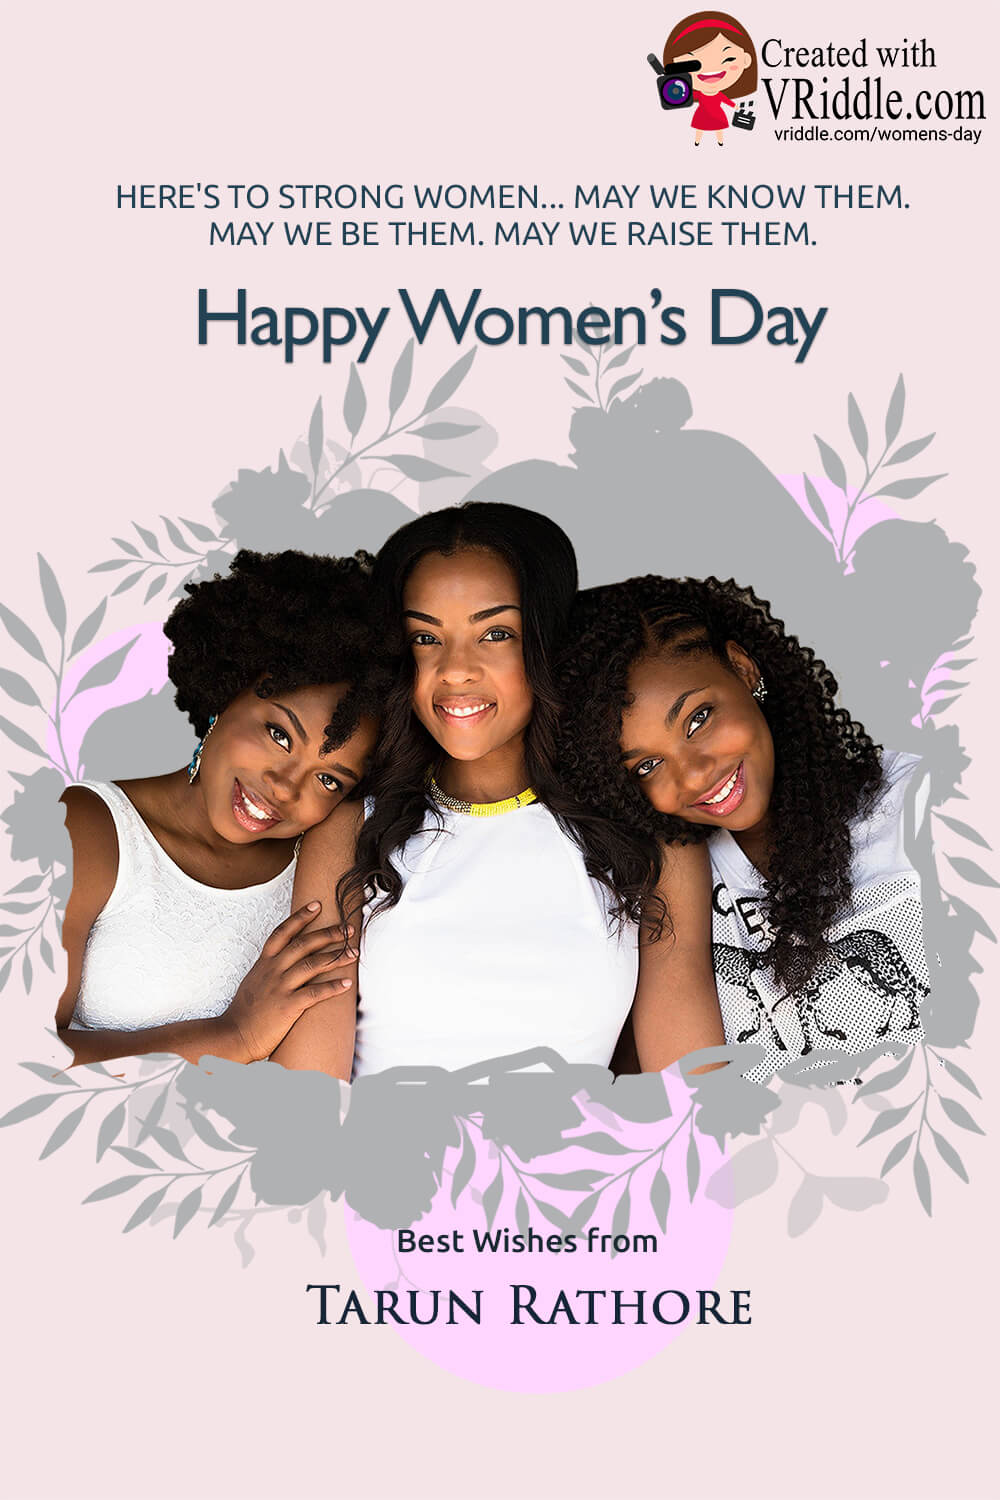 Create Women's Day Greetings, Wishes Videos, Greeting Cards and ...